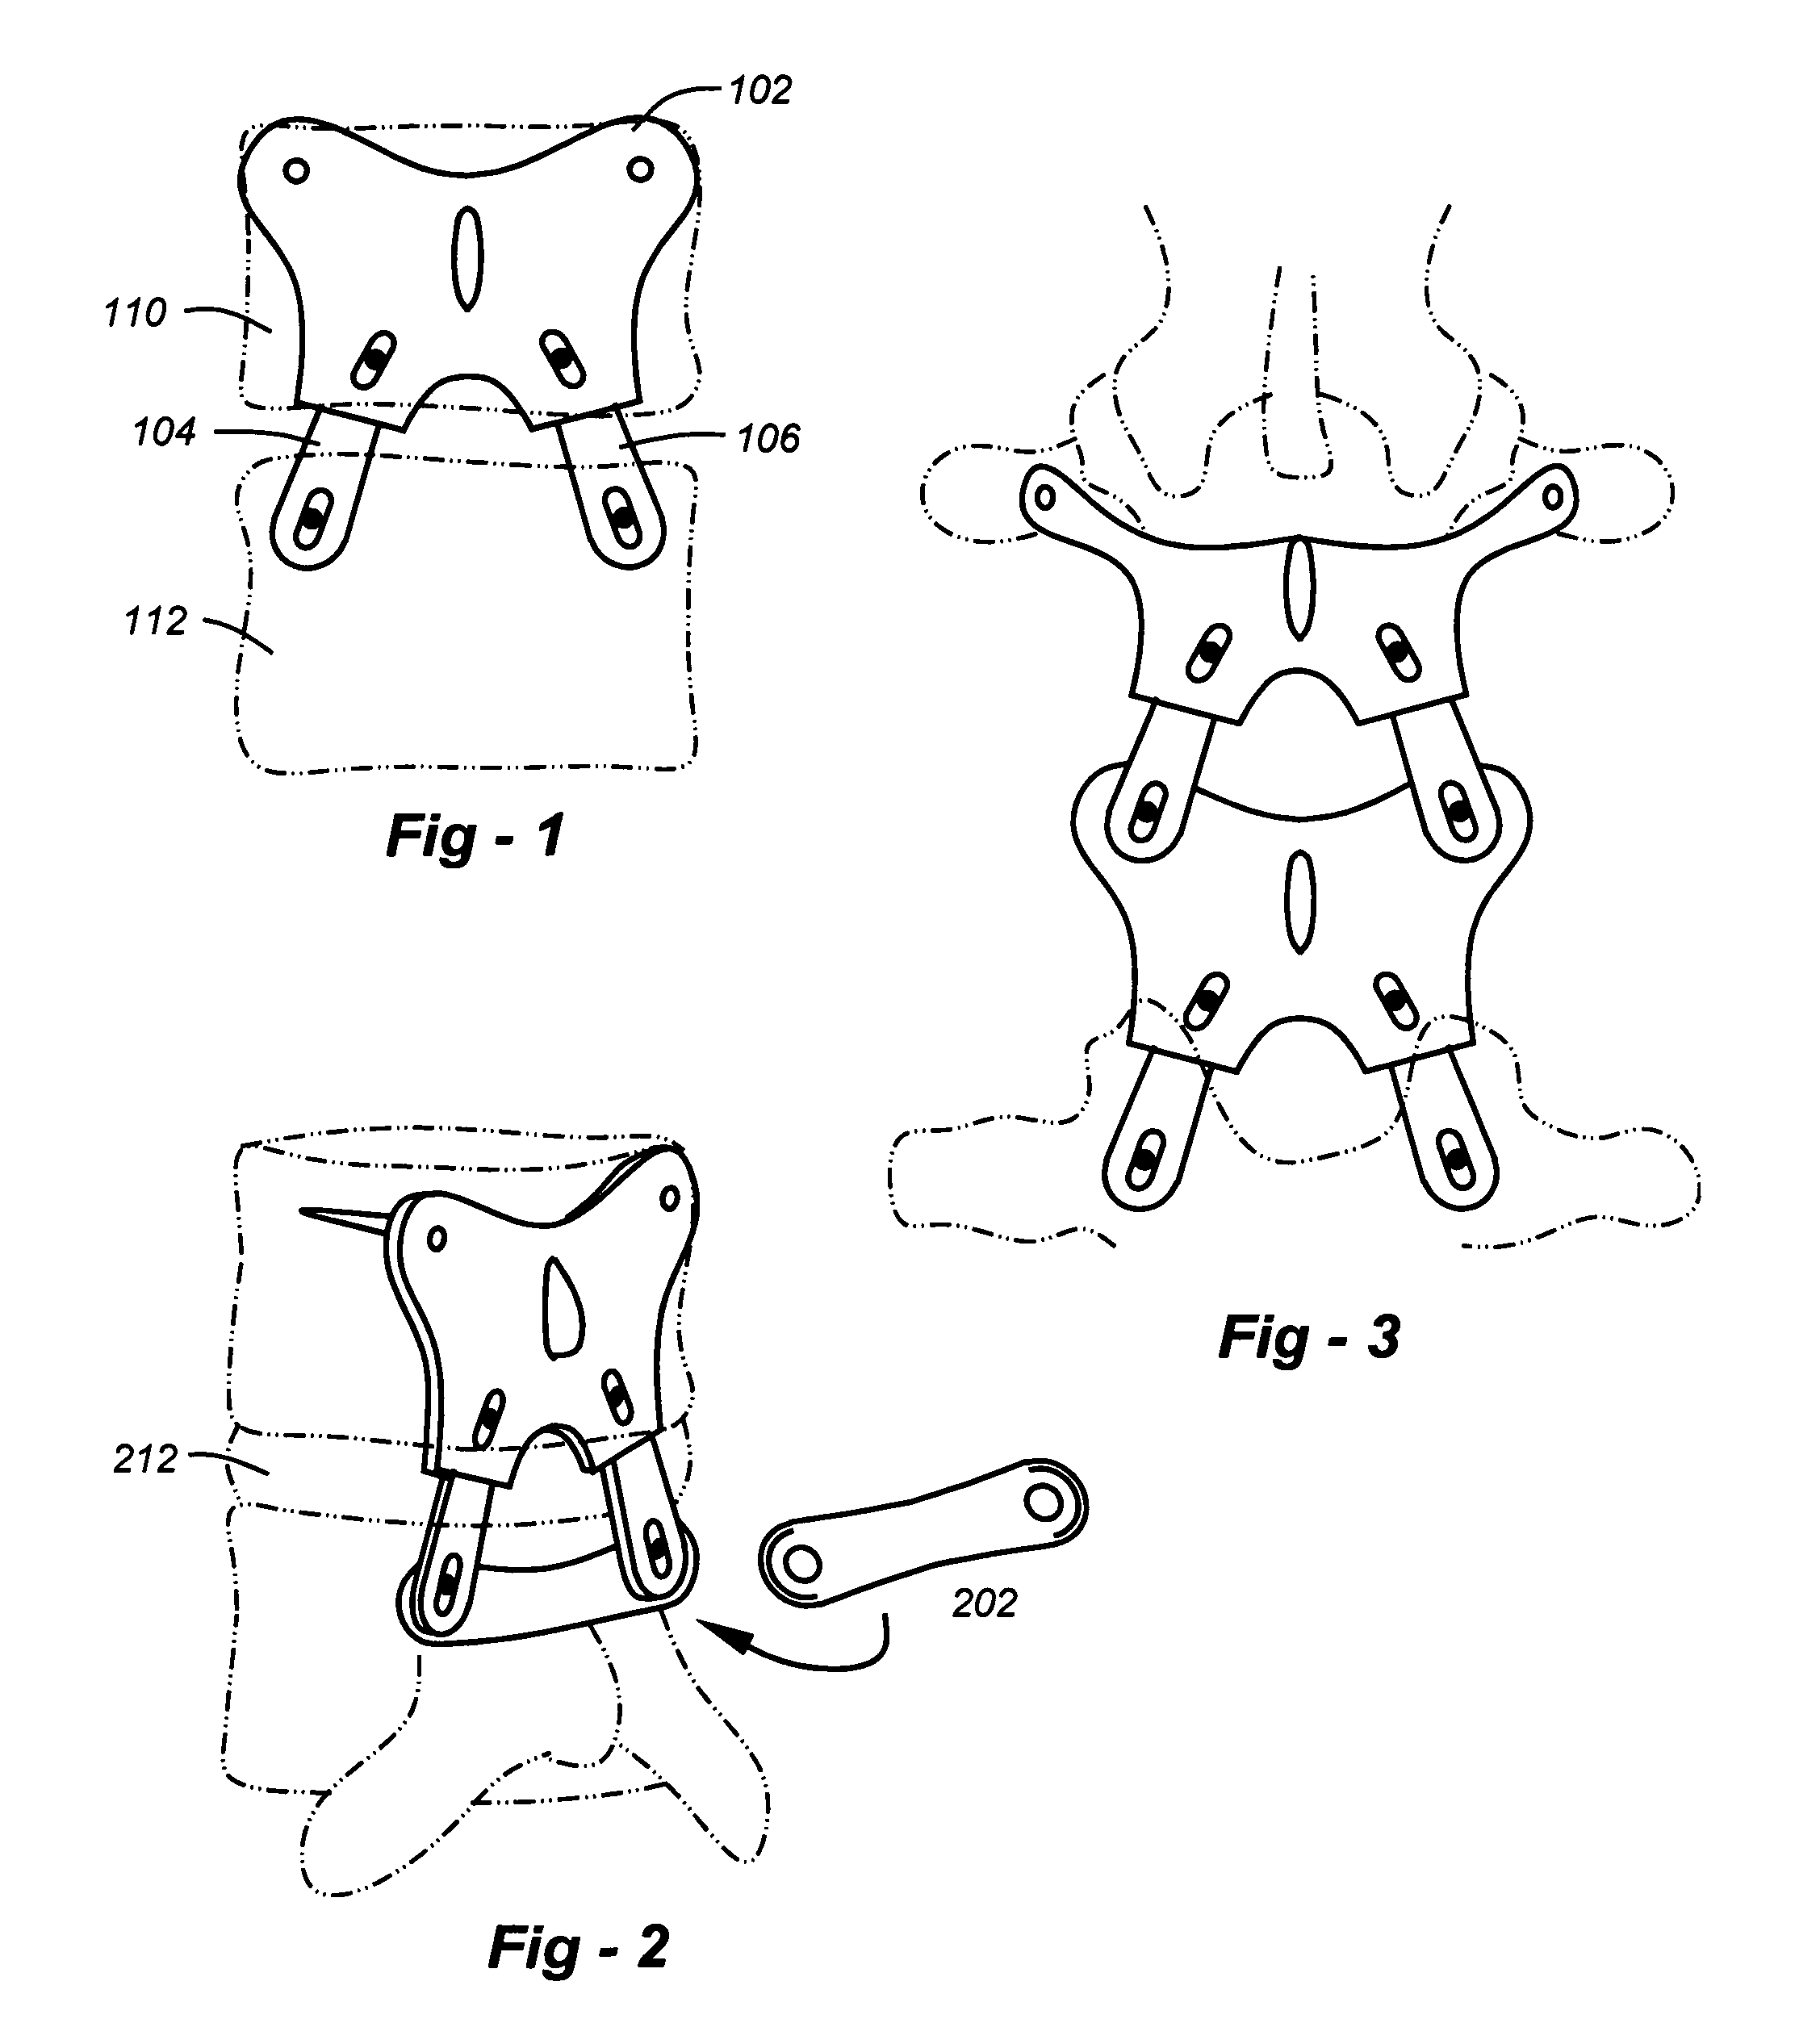 Posterior spinal reconstruction system